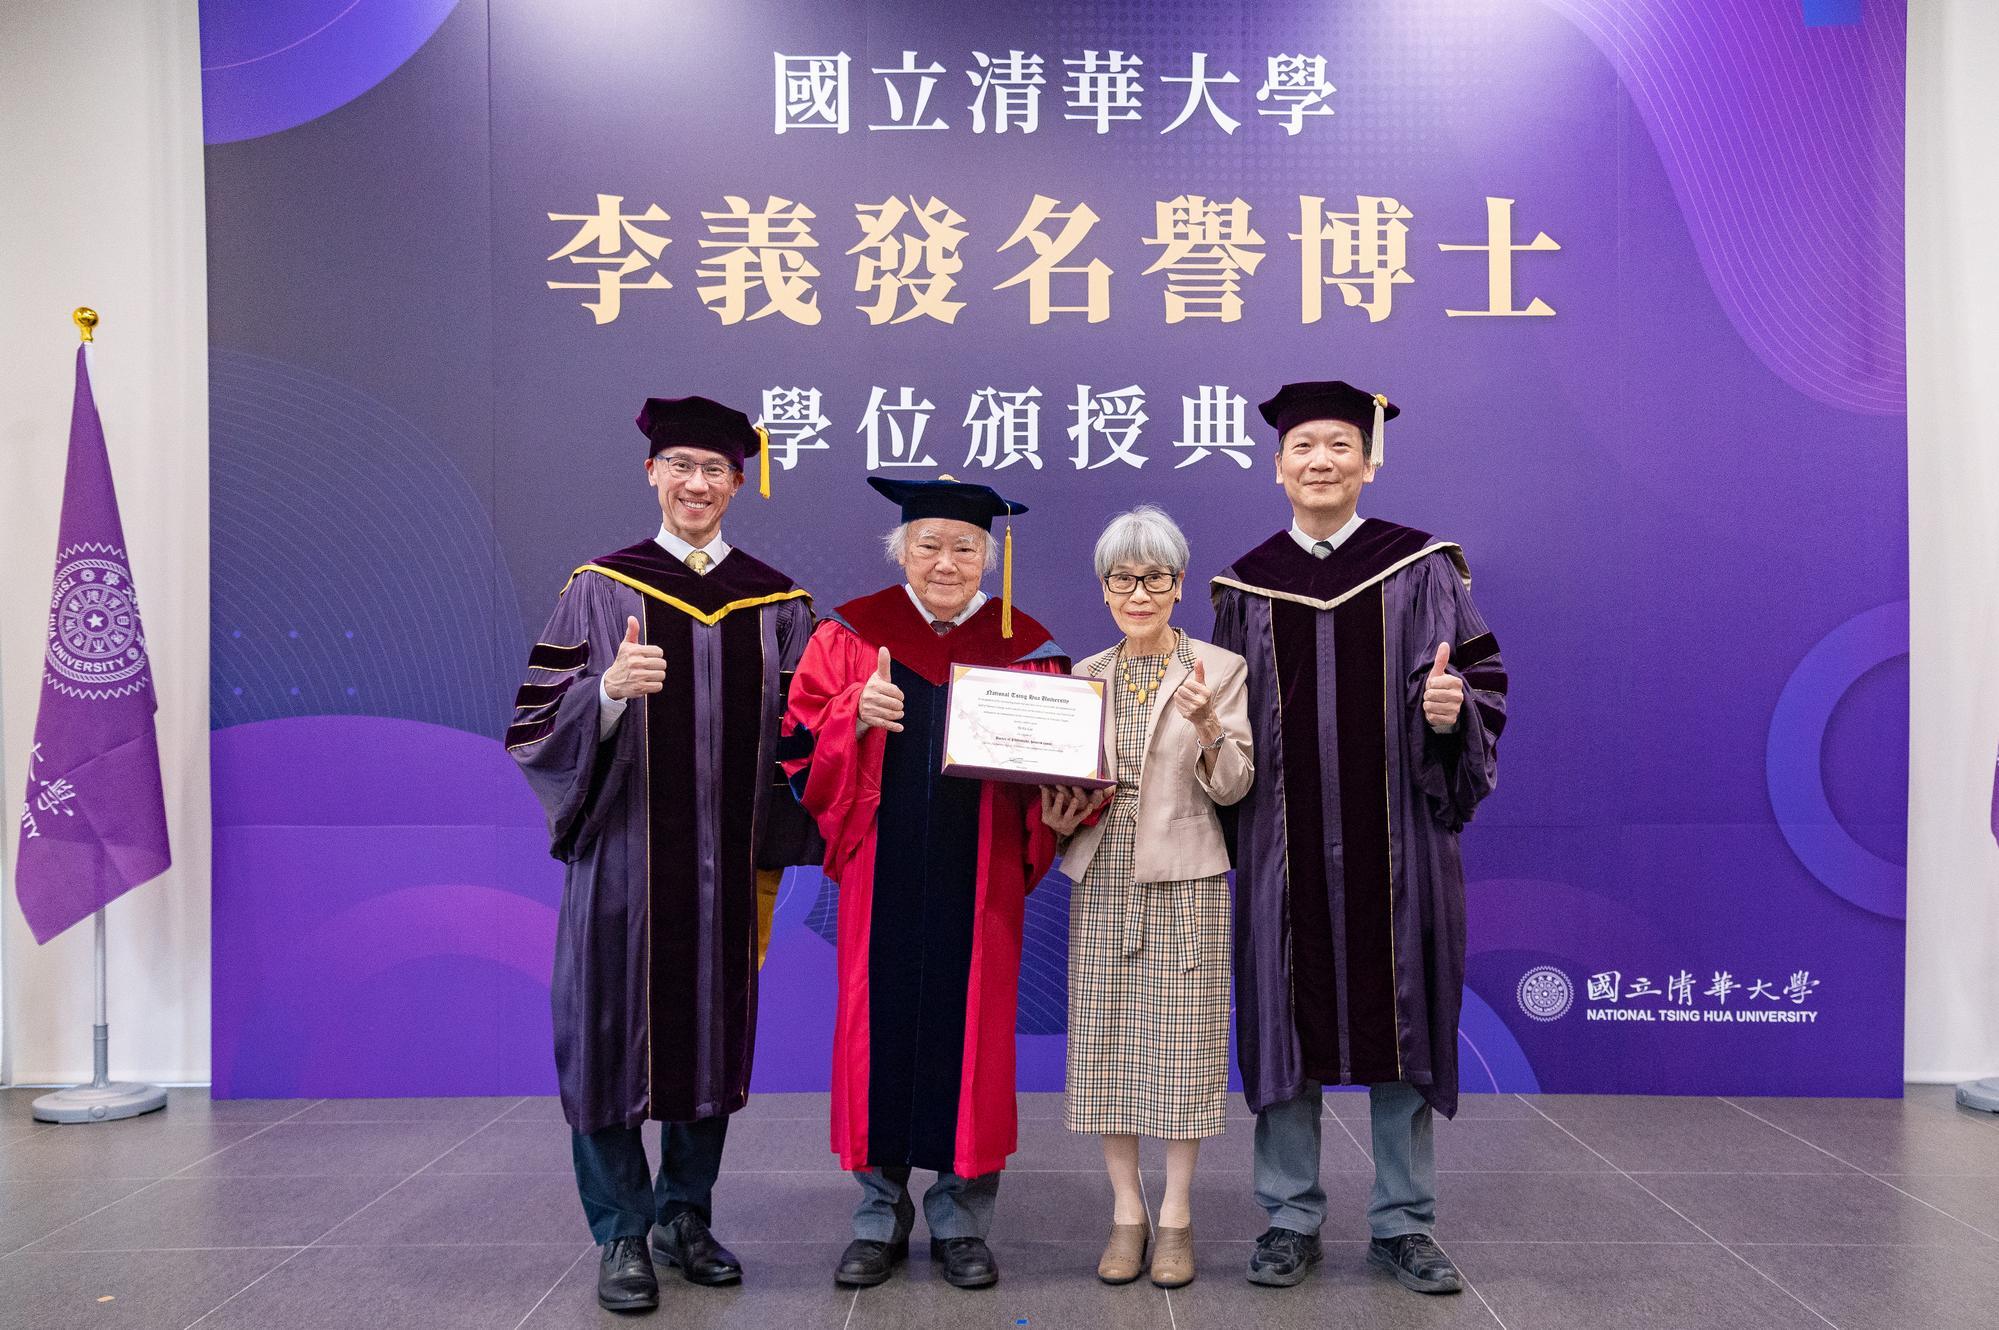 President W. John Kao (高為元) (left) and the Dean of NTHU College of Science, Chung-Yu Mou (牟中瑜) (right) conferring an honorary doctoral degree upon Dr. Yi-Fa Lee (李義發) (2nd left). Dr. Lee's wife was also present for a commemorative photo.